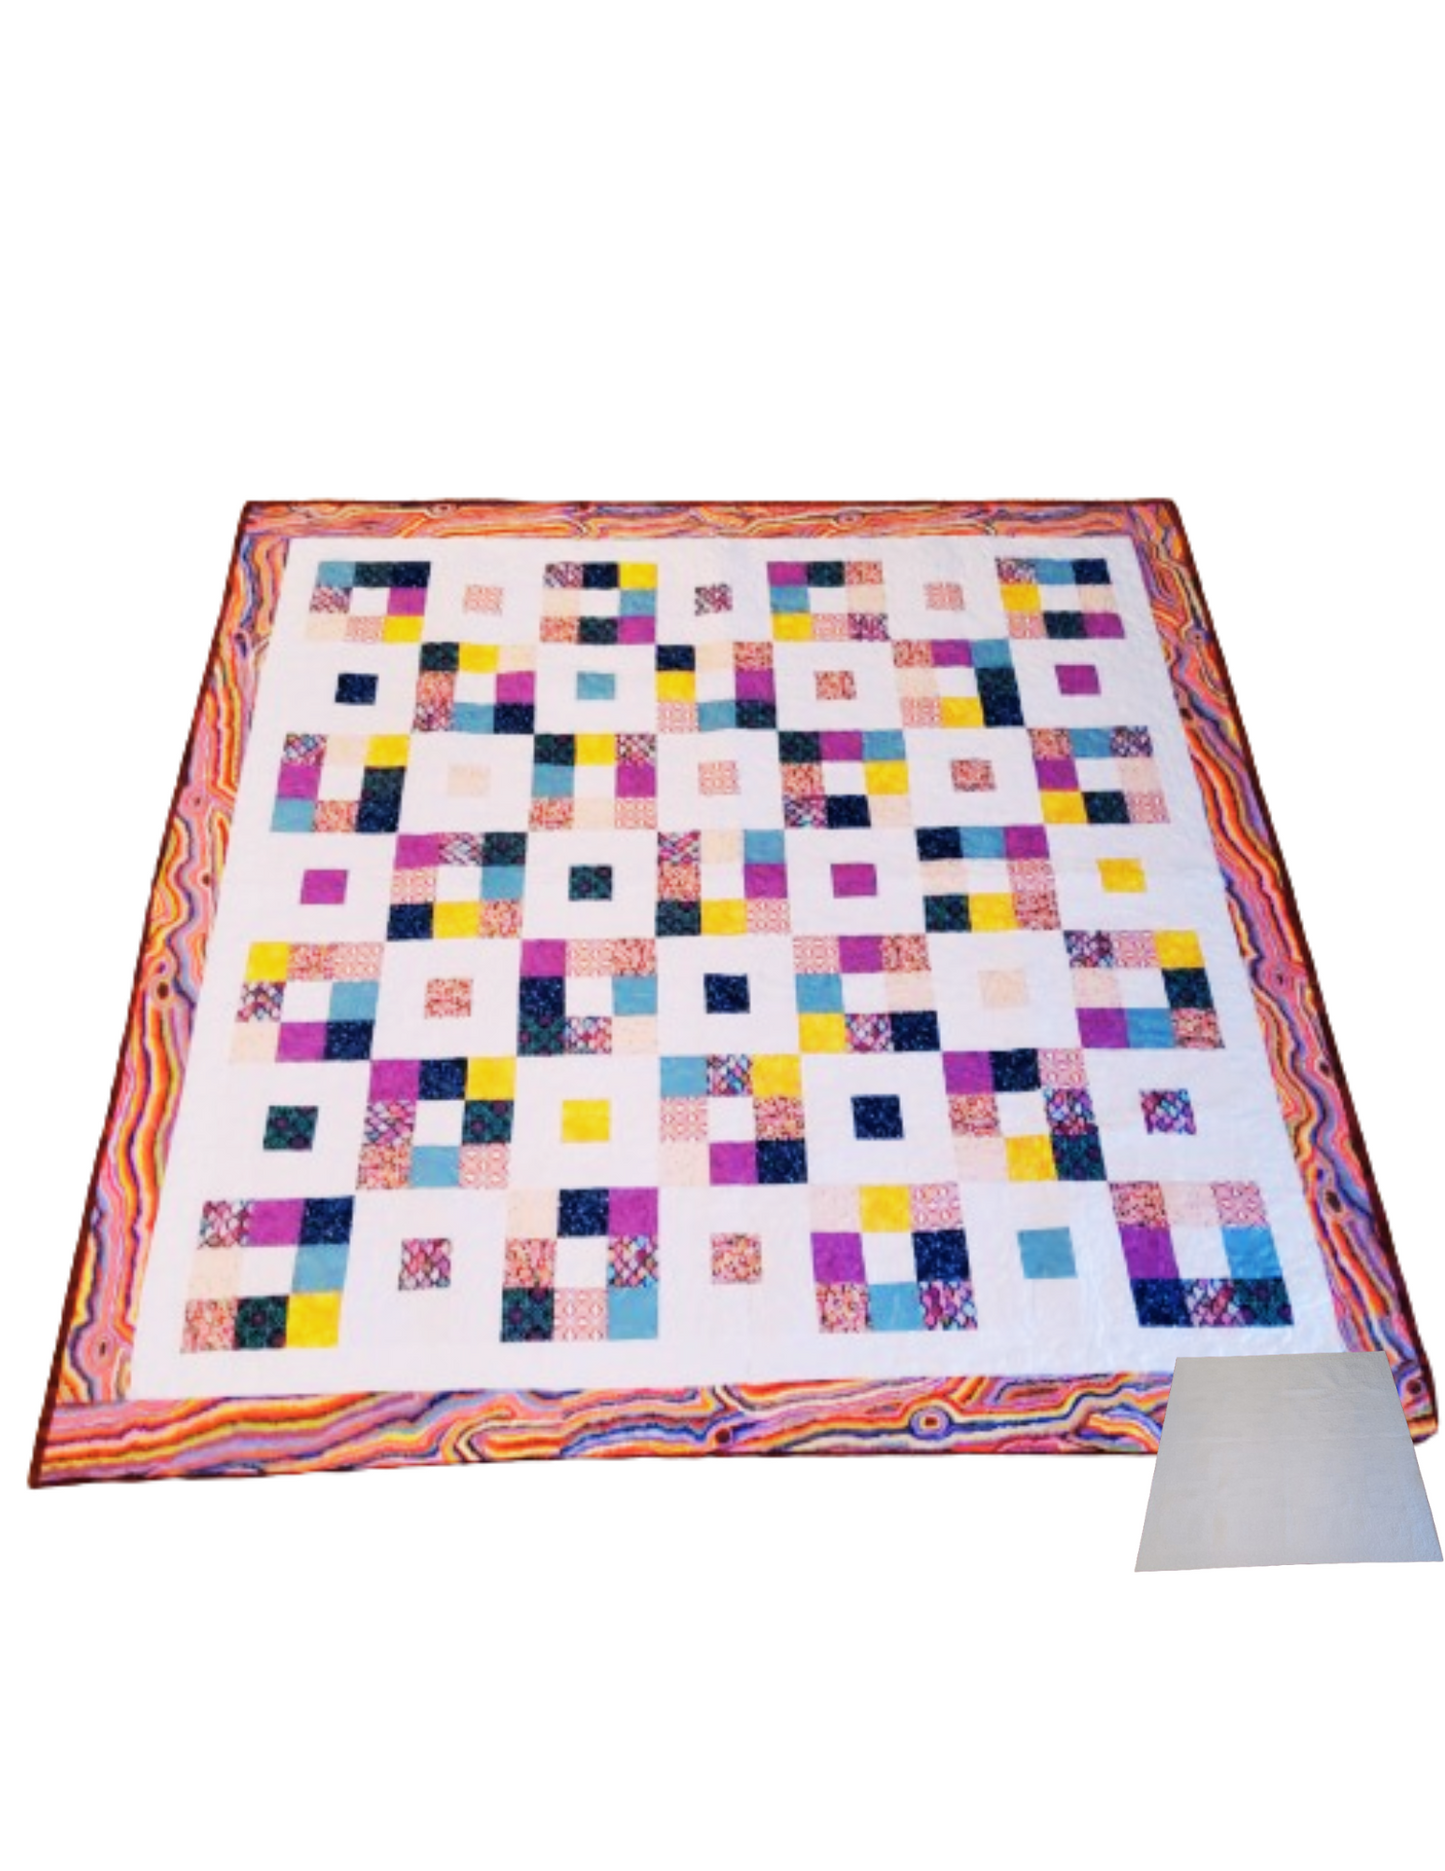 Baby 9 Patch Quilt